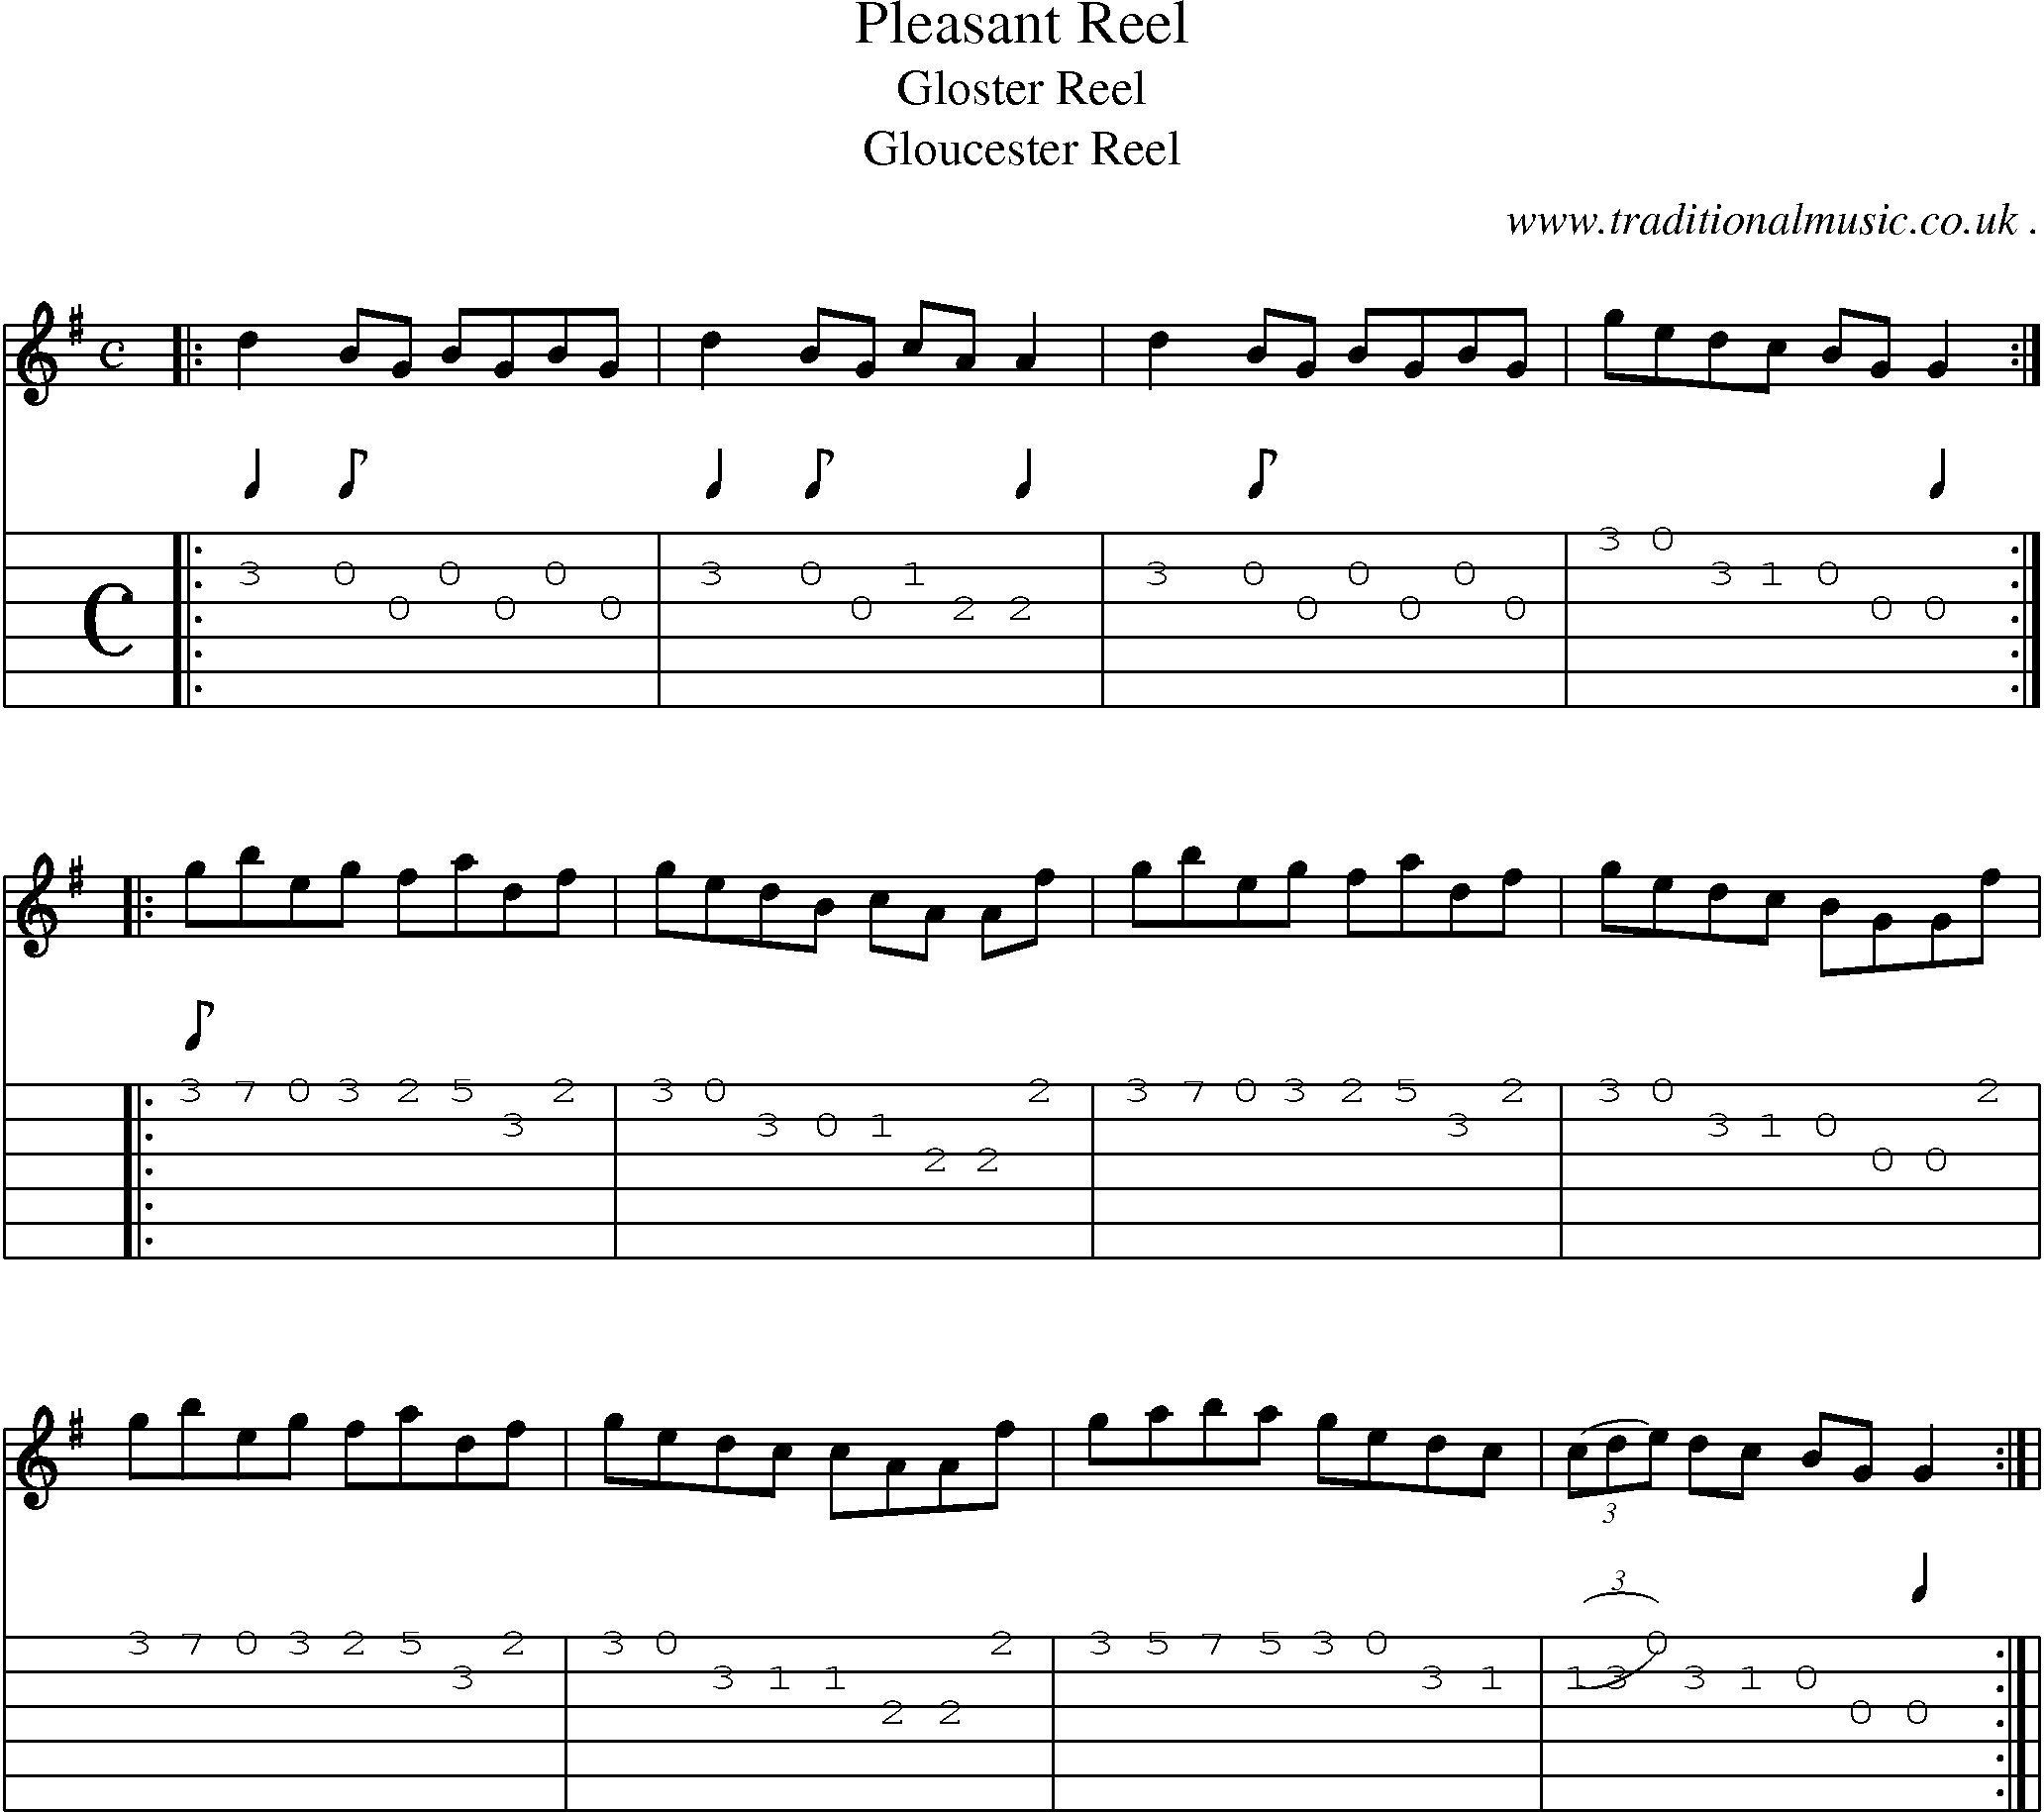 Sheet-Music and Guitar Tabs for Pleasant Reel